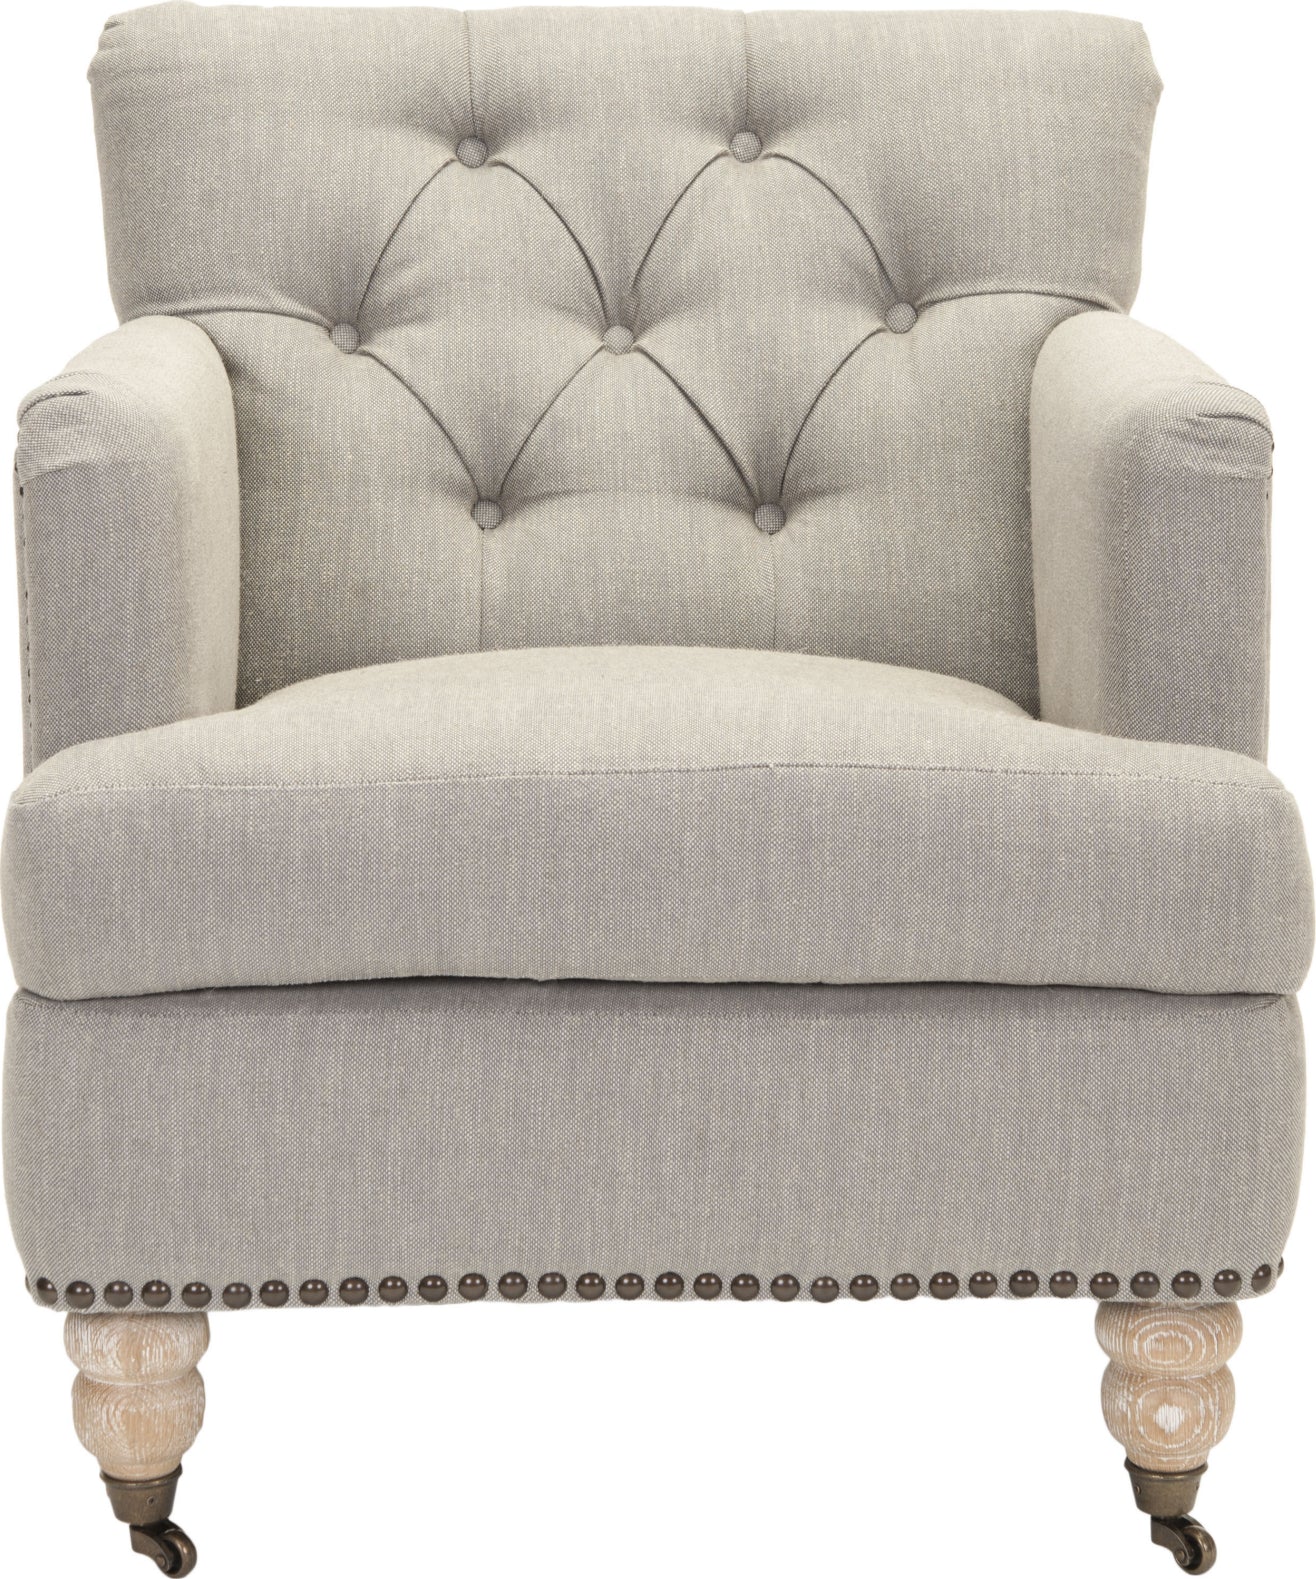 Safavieh Colin Tufted Club Chair With Brass Nail Heads Stone and Grey White Wash Furniture main image